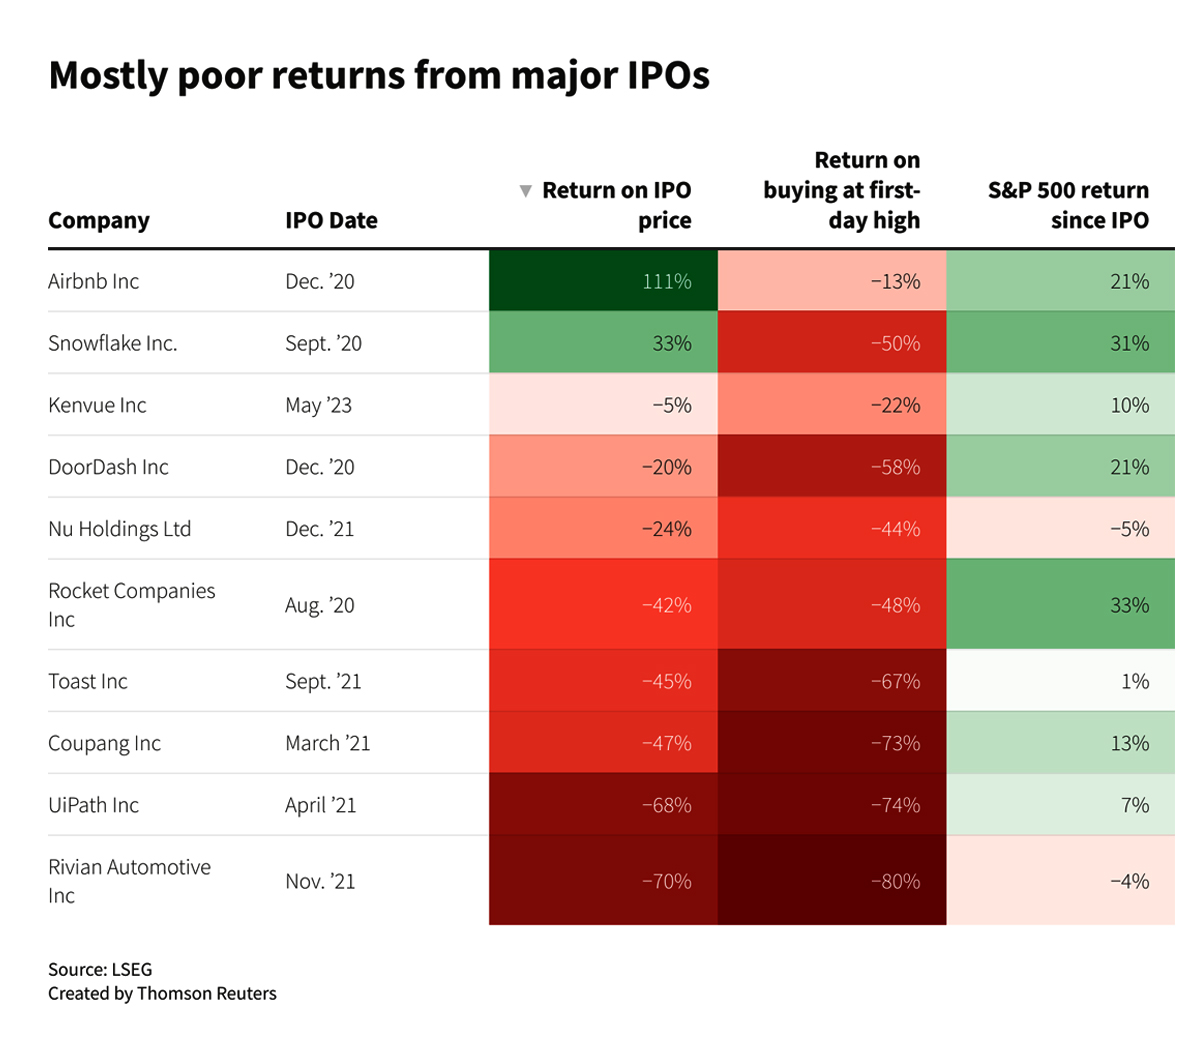 Mostly poor returns from major US IPOs